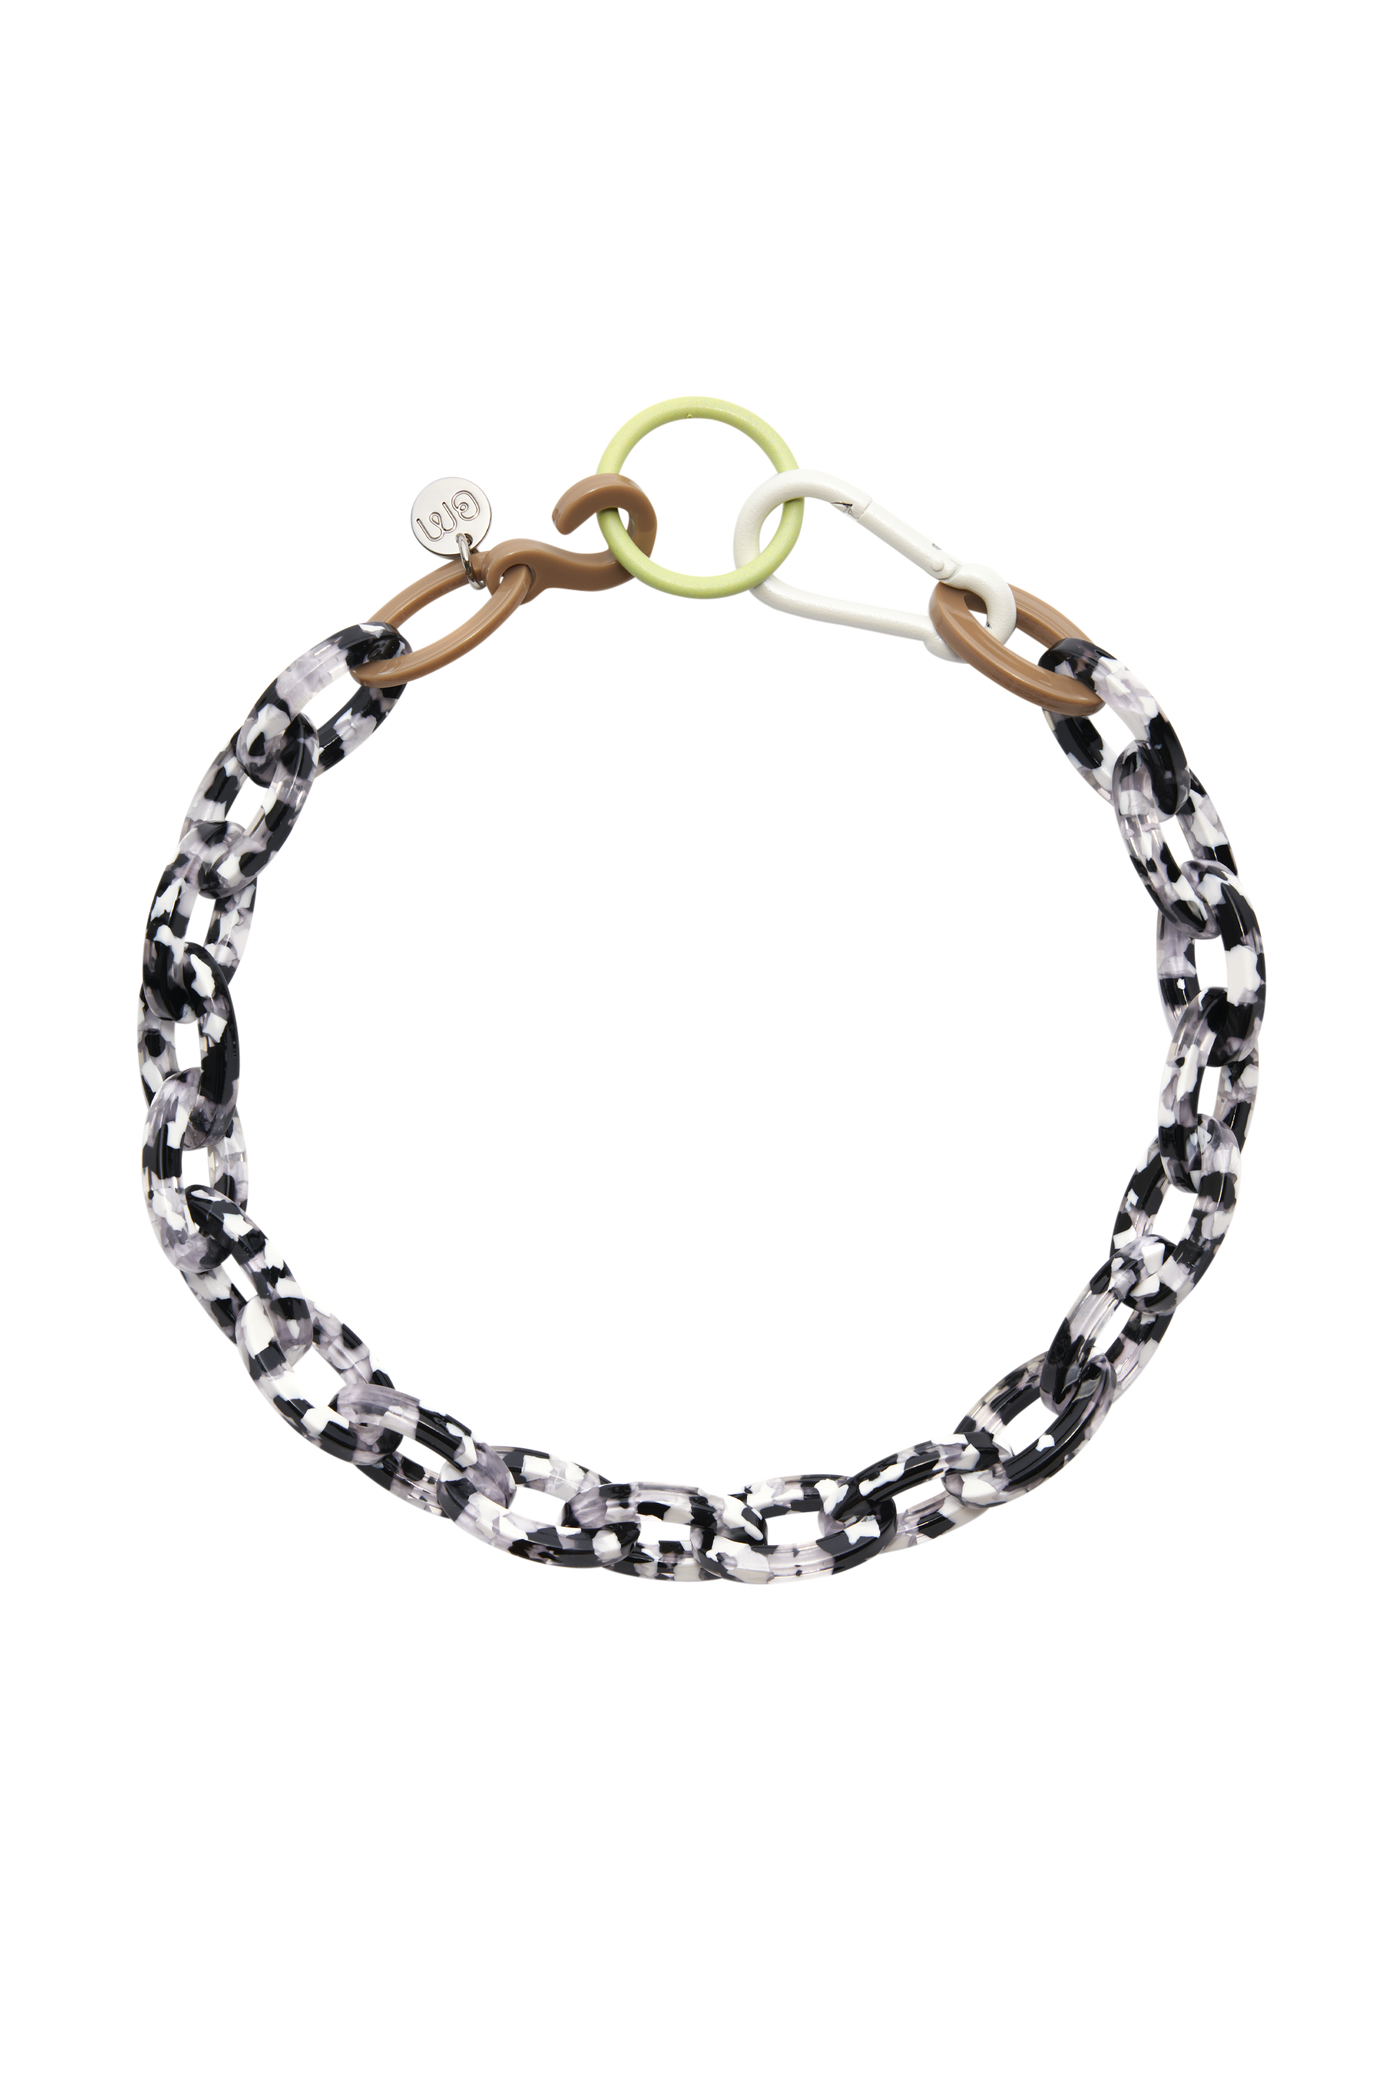 Bianca Mavrick Jewellery Black and White Static Chain Link Necklace with Carabiner & Ring Clasp